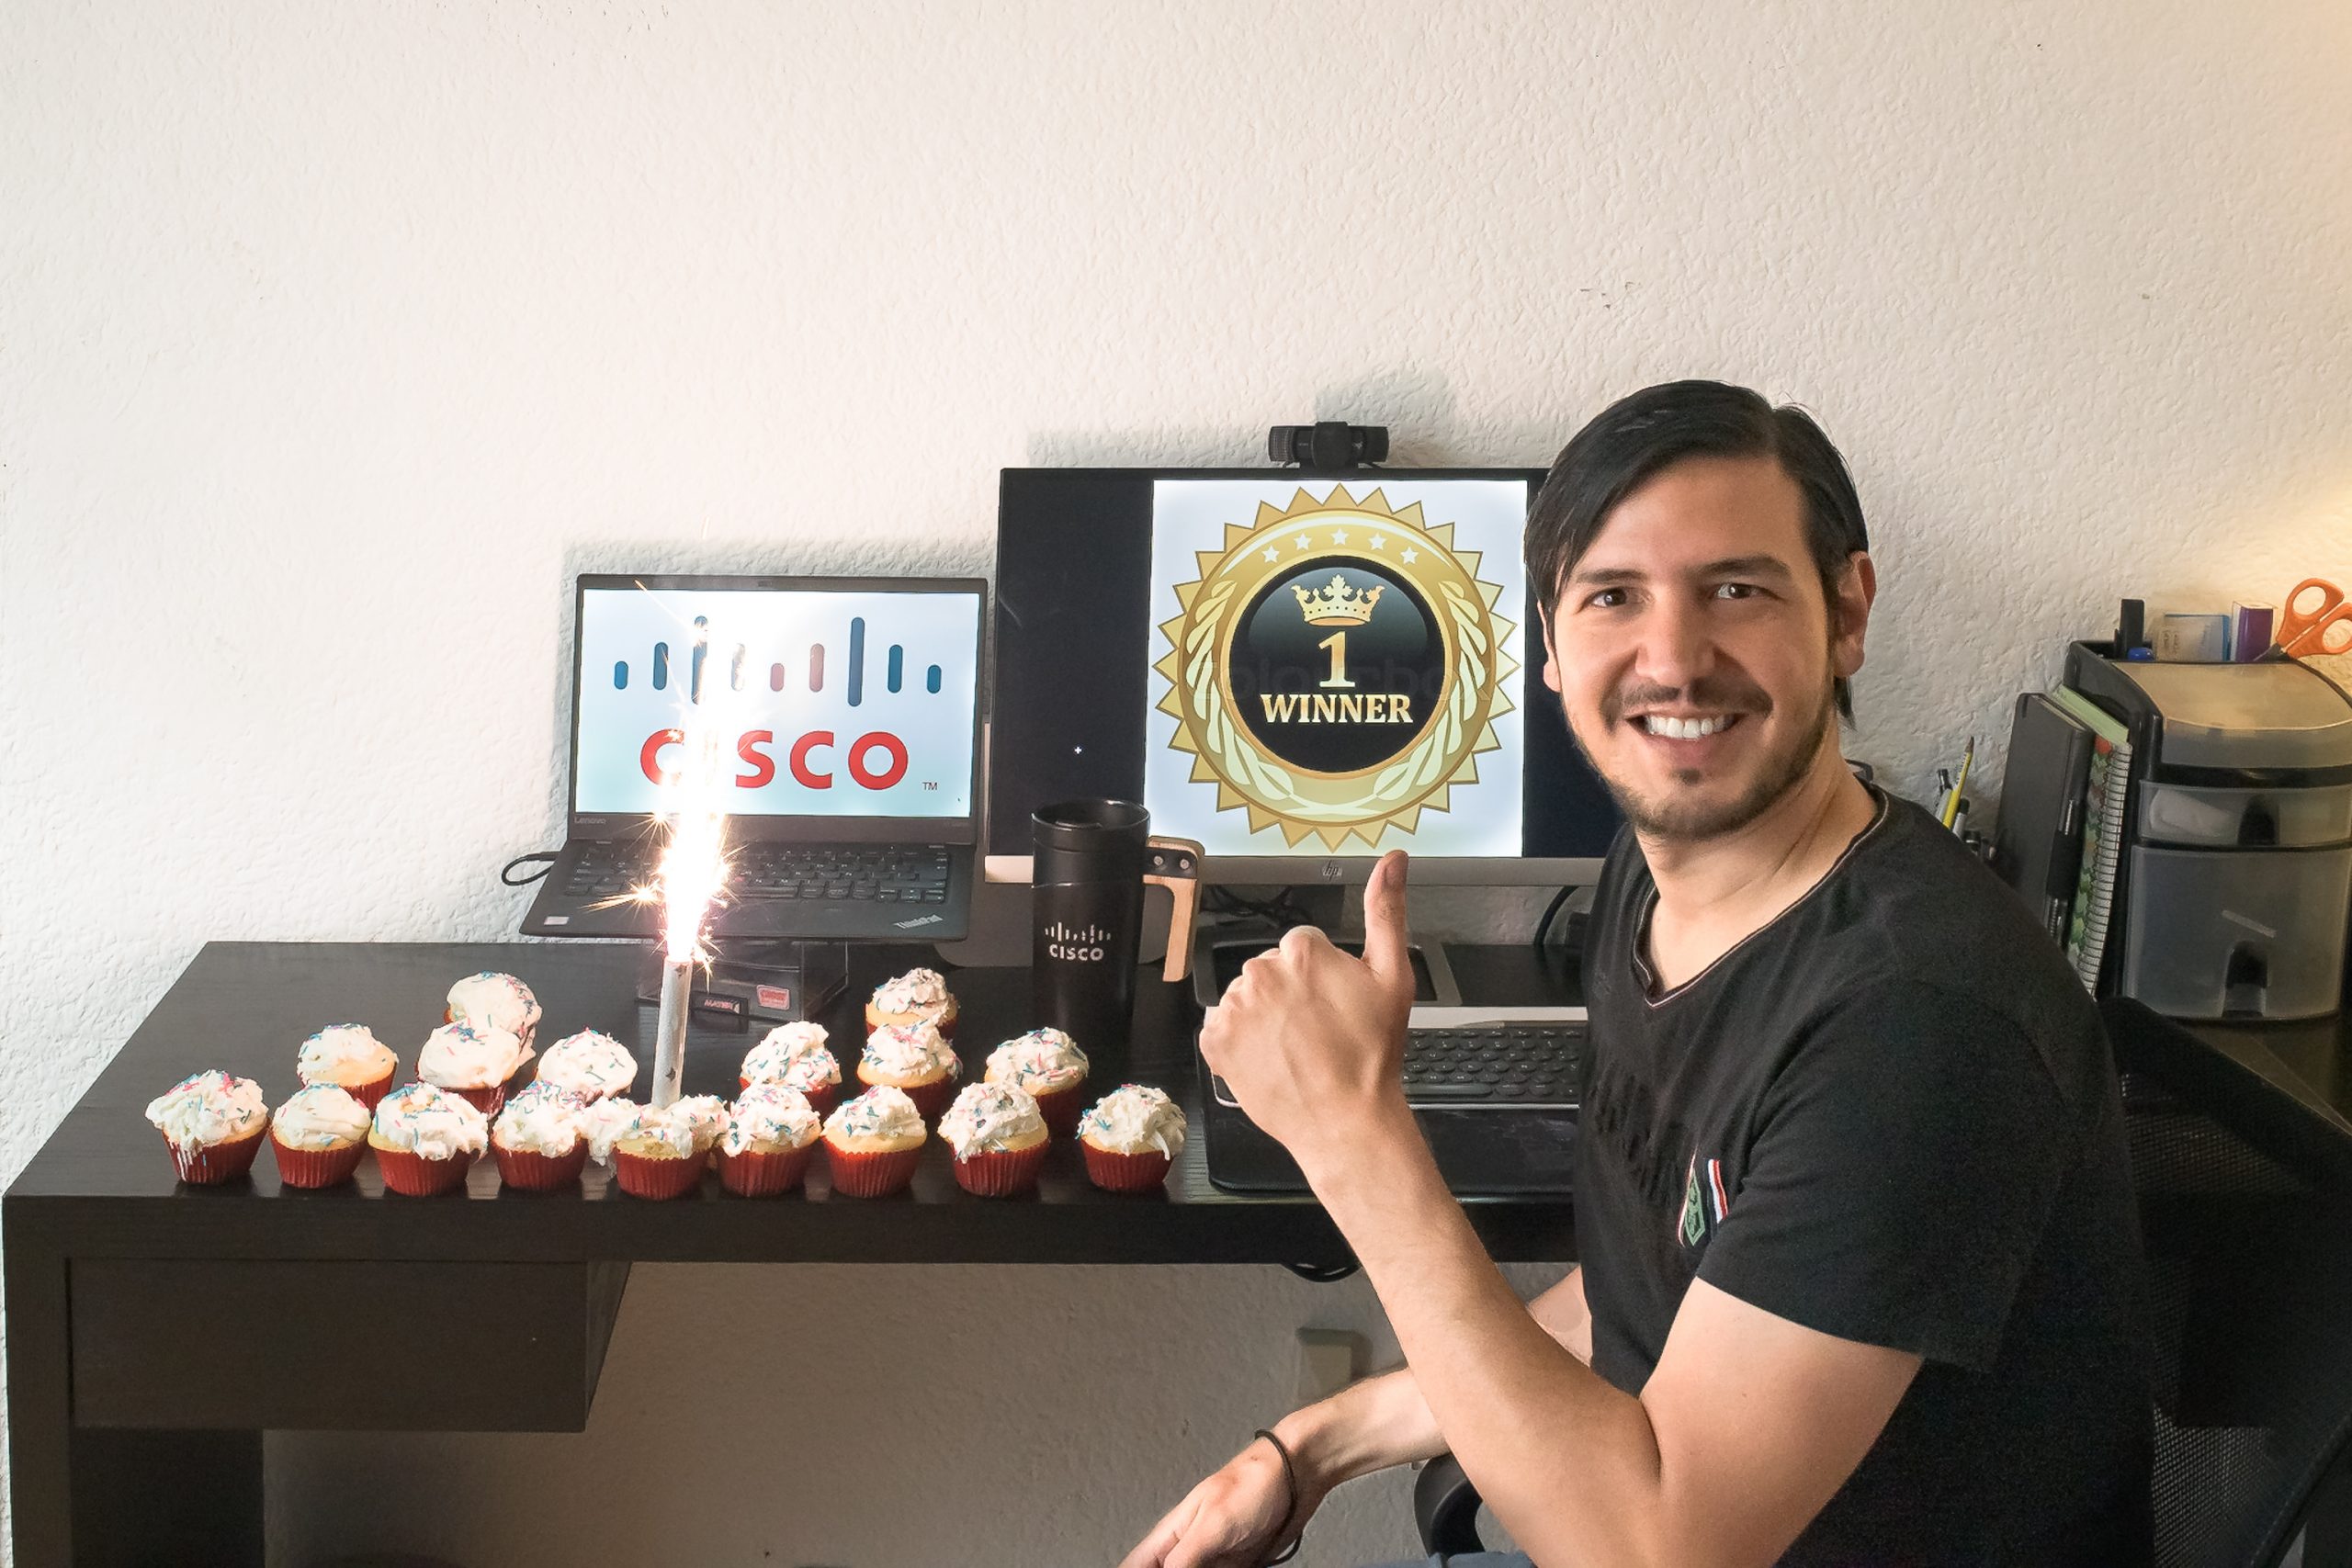 Javier sits at his desk with cupcakes in the shape of a Cisco logo and holds up his finger as #1.